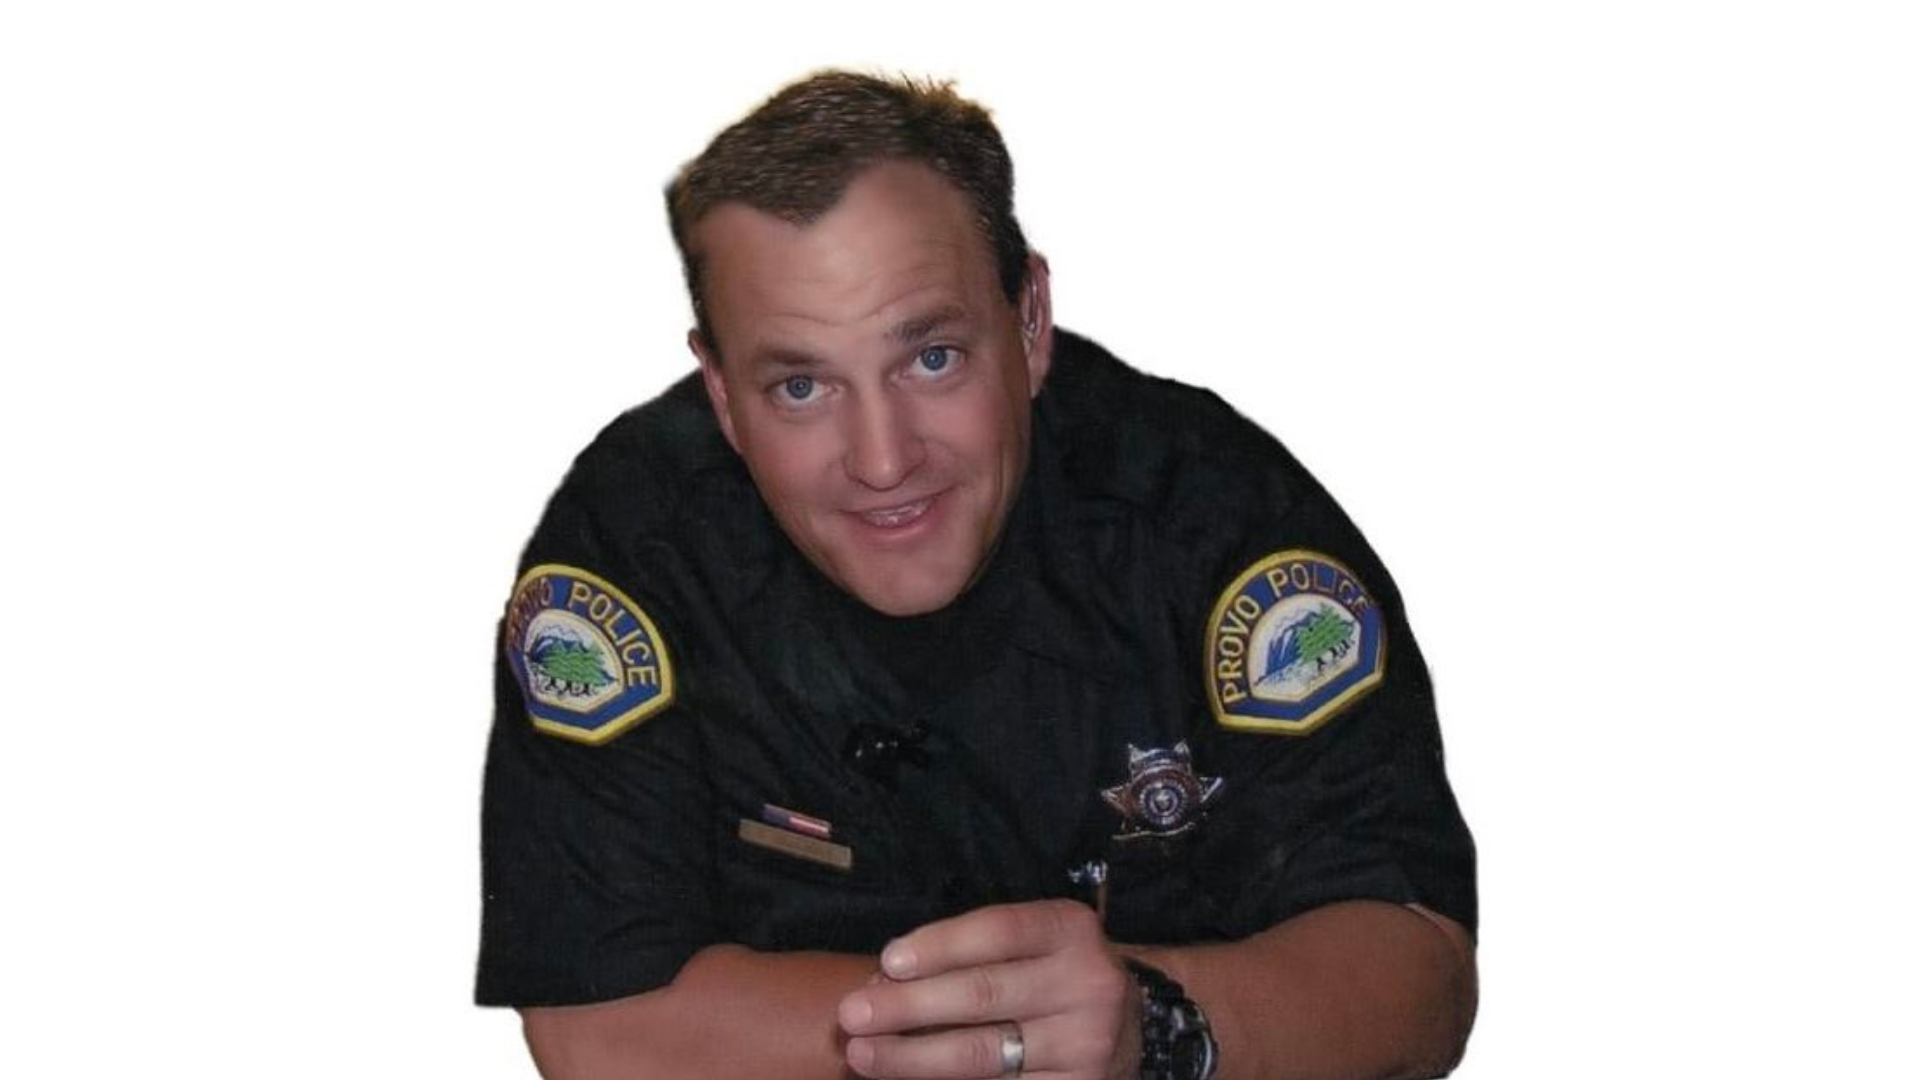 Officer Trenton Halladay pictured, he'll be added to the state's fallen officers memorial...